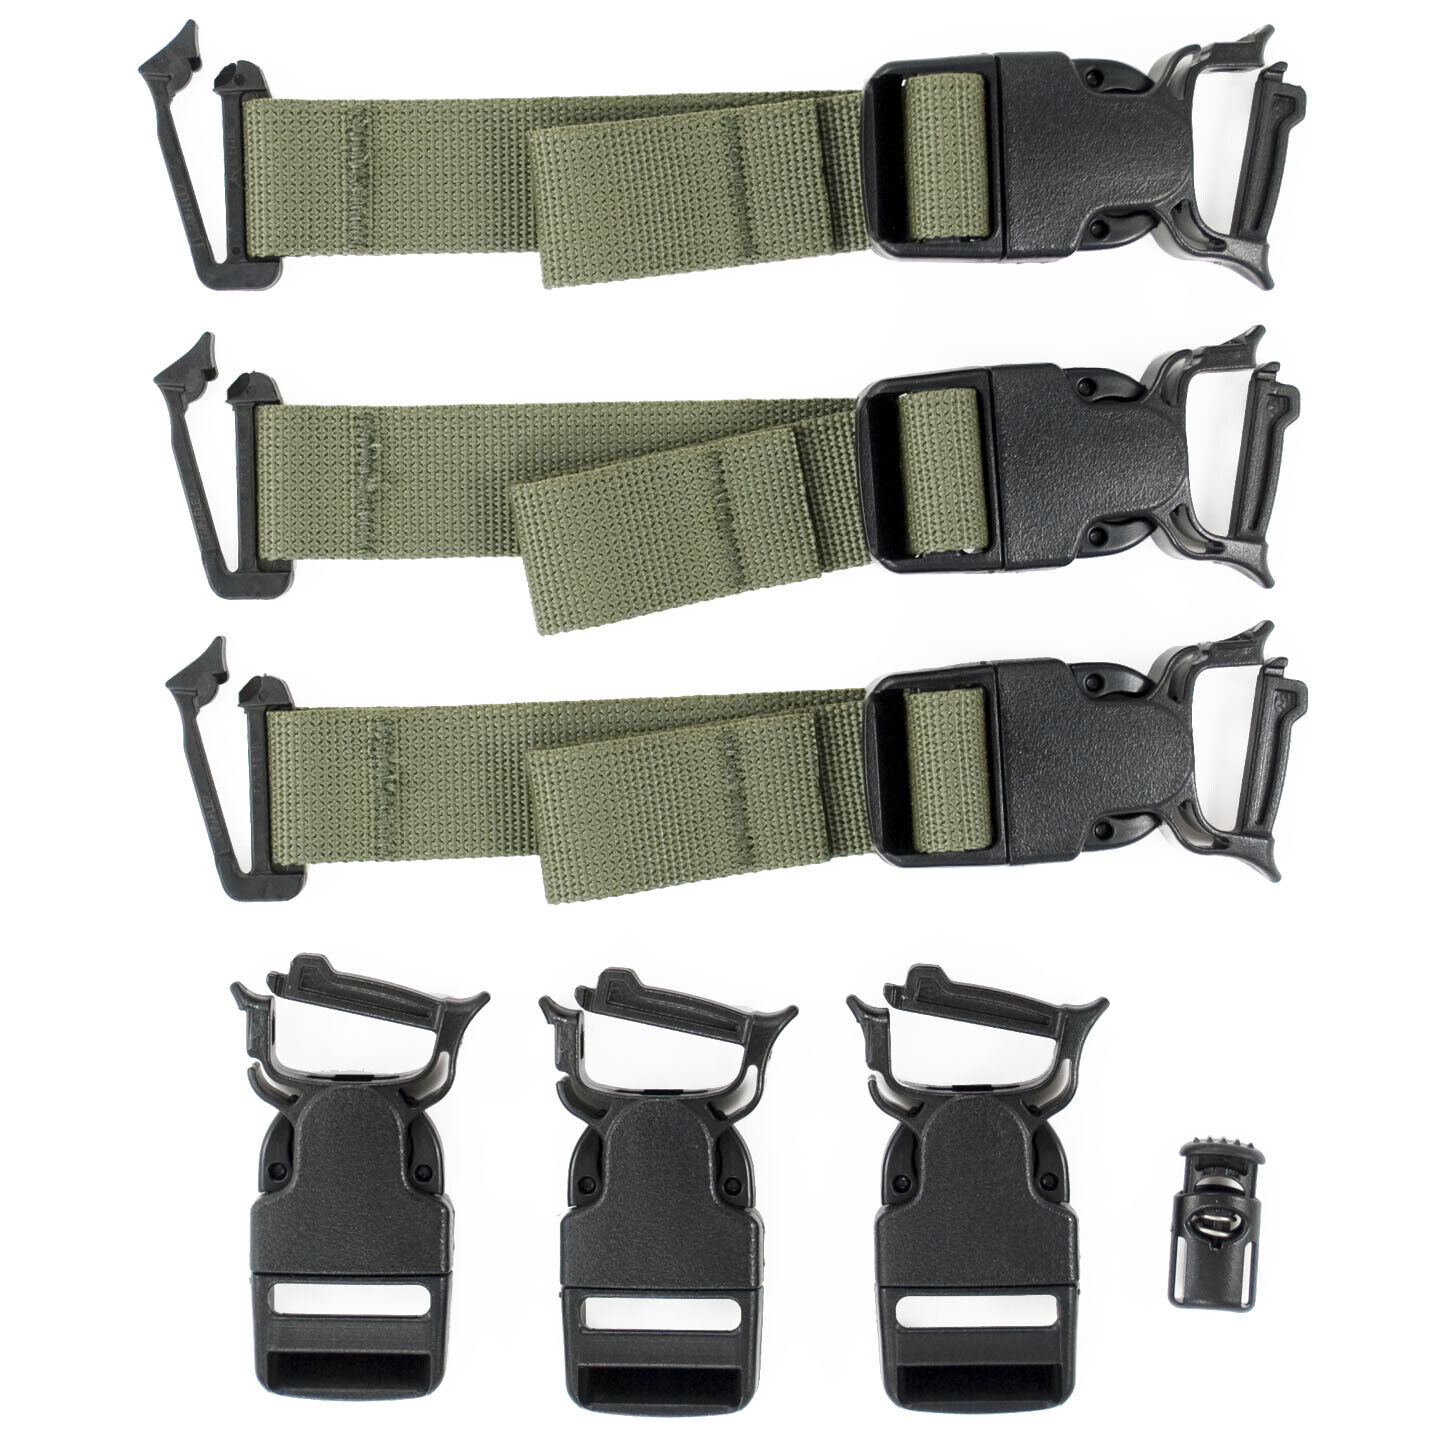 ALICE Pack Quick Release Black Buckle Upgrade Kit - Fits Medium or Large Ruck